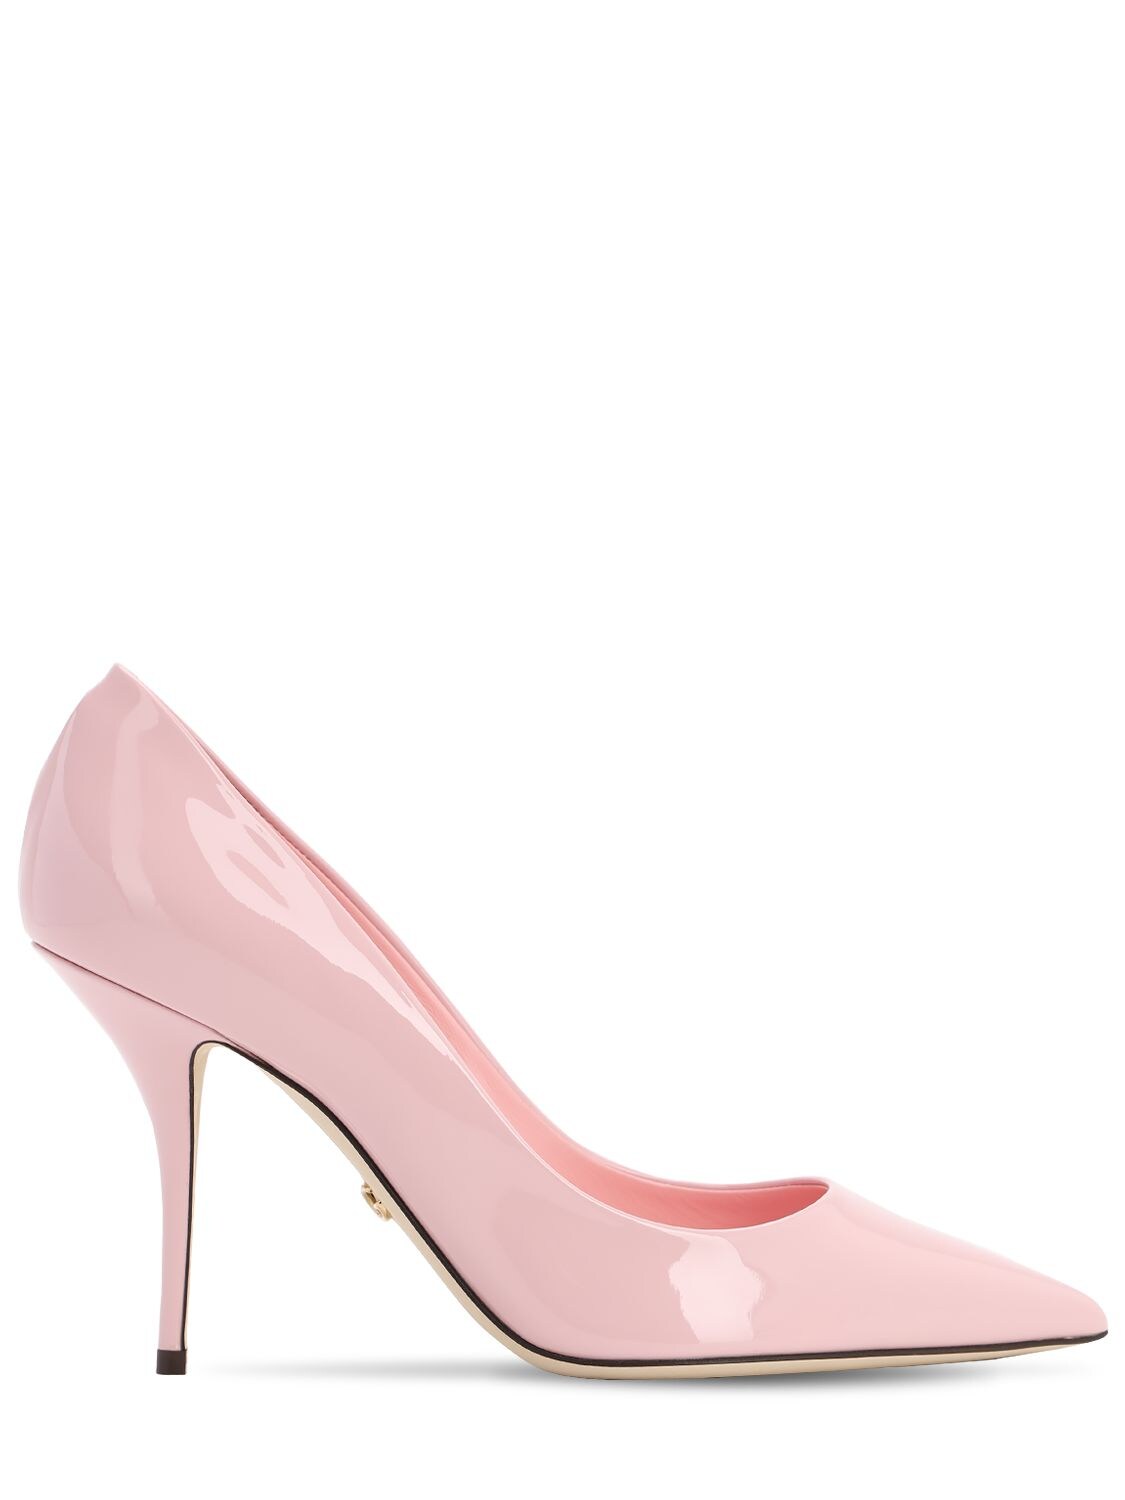 Dolce & Gabbana 90mm Patent Leather Pumps In Pink